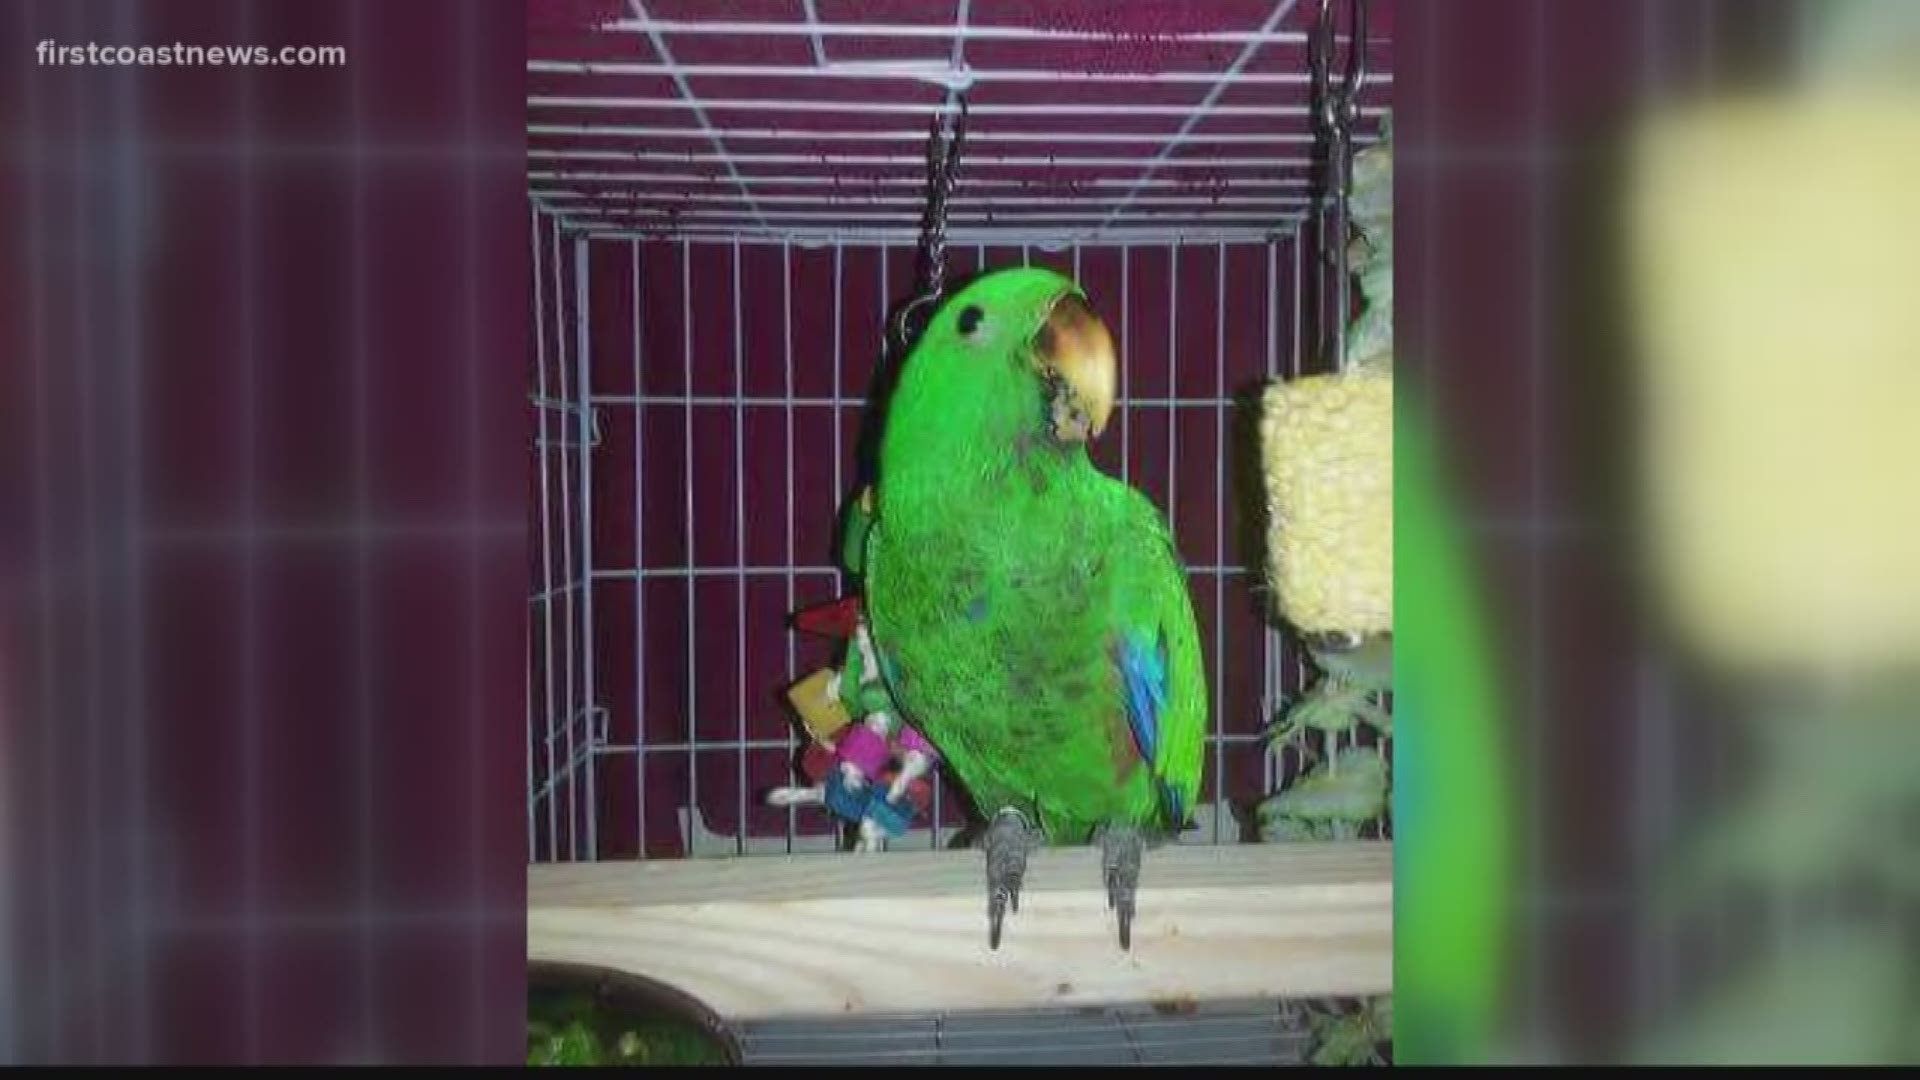 Betty Jenner says her parrot "Koa" was her lifeline and her reason to wake up in the morning. Now, he's been missing for a month.